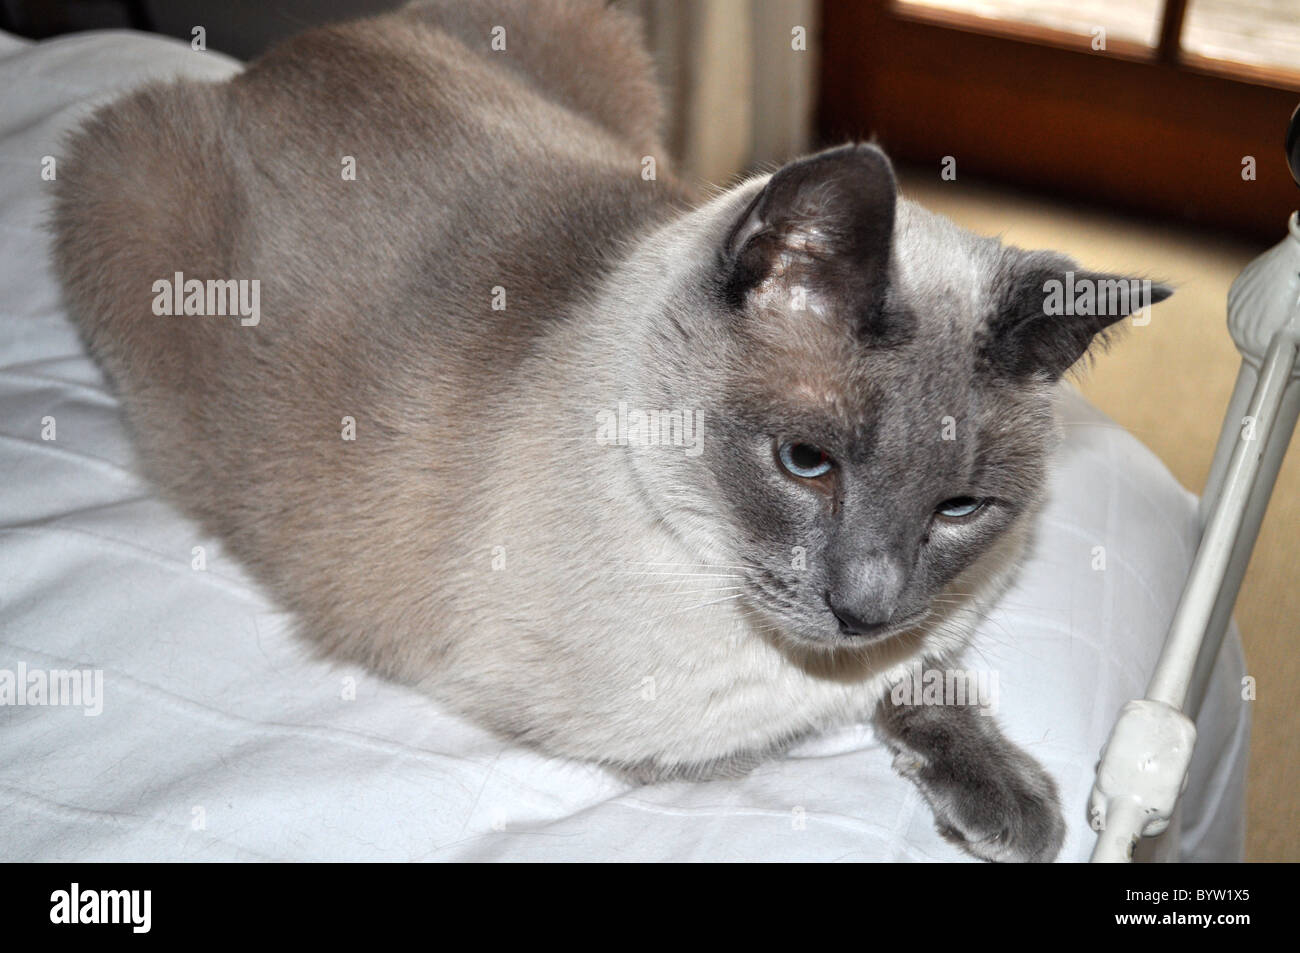 Blue point traditional Siamese male, Los Angeles, breed somewhere between applehead and wedge, once abandoned now homed. Stock Photo